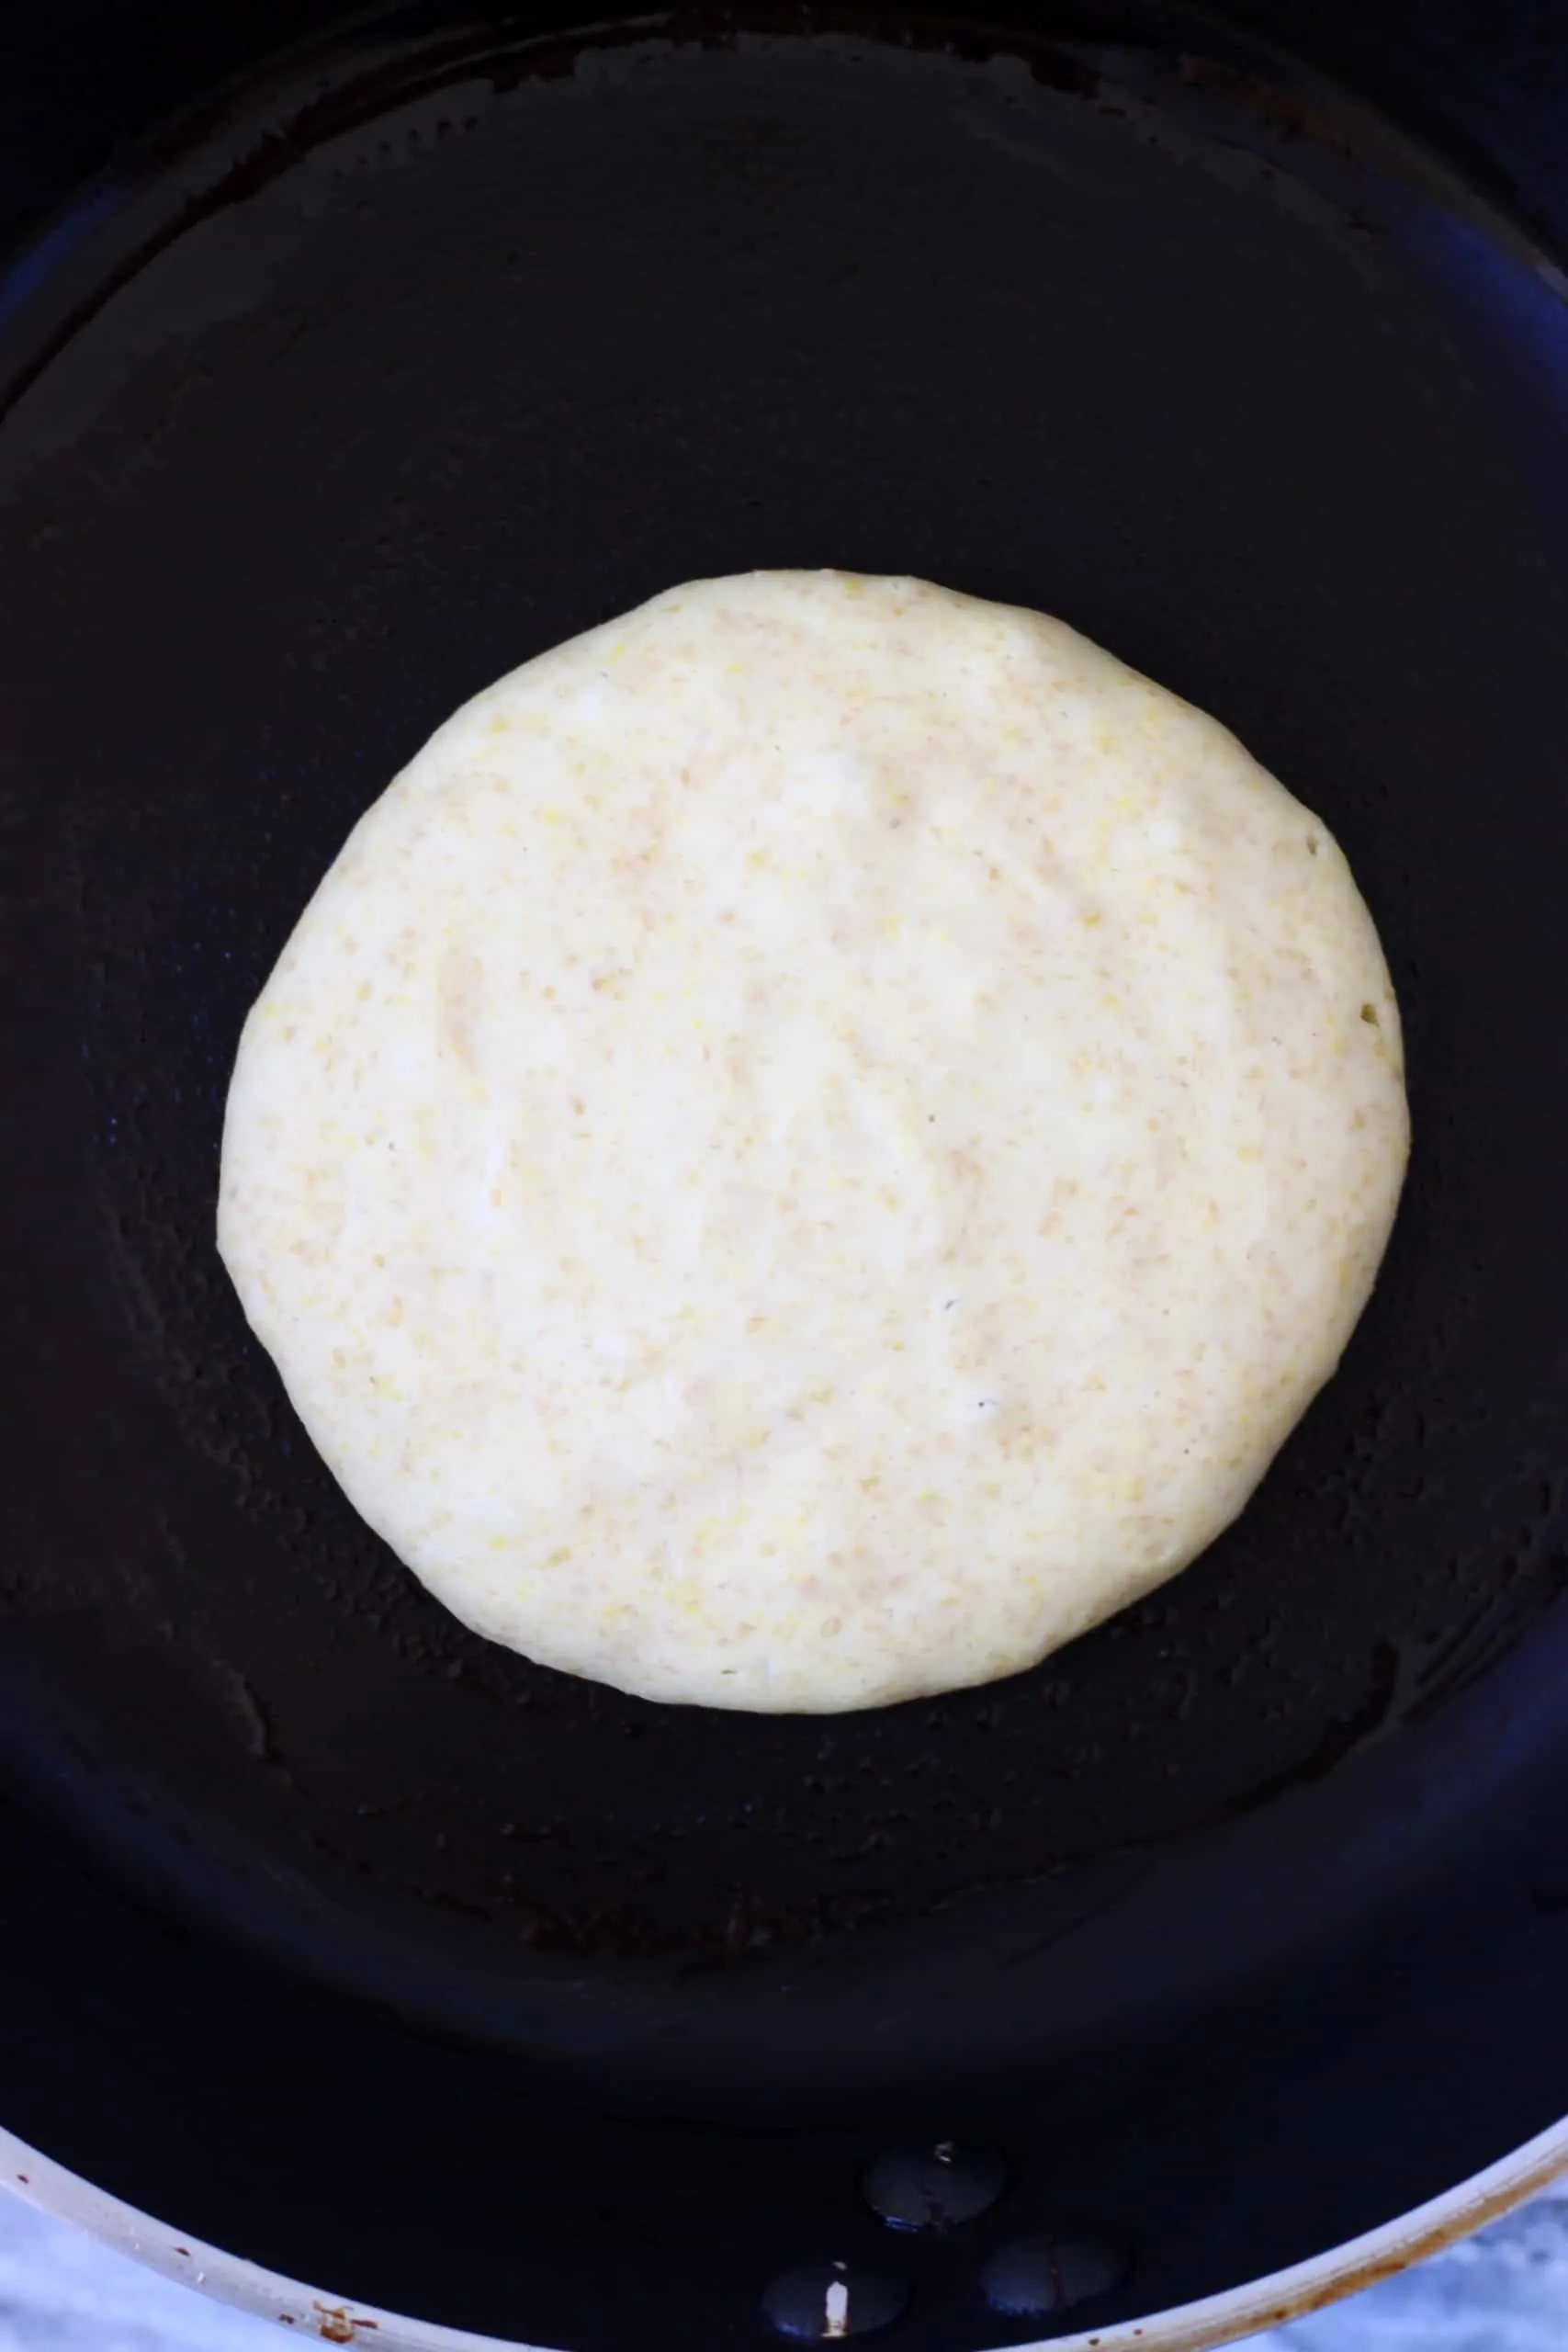 A flaxseed pancake being cooked in a black frying pan